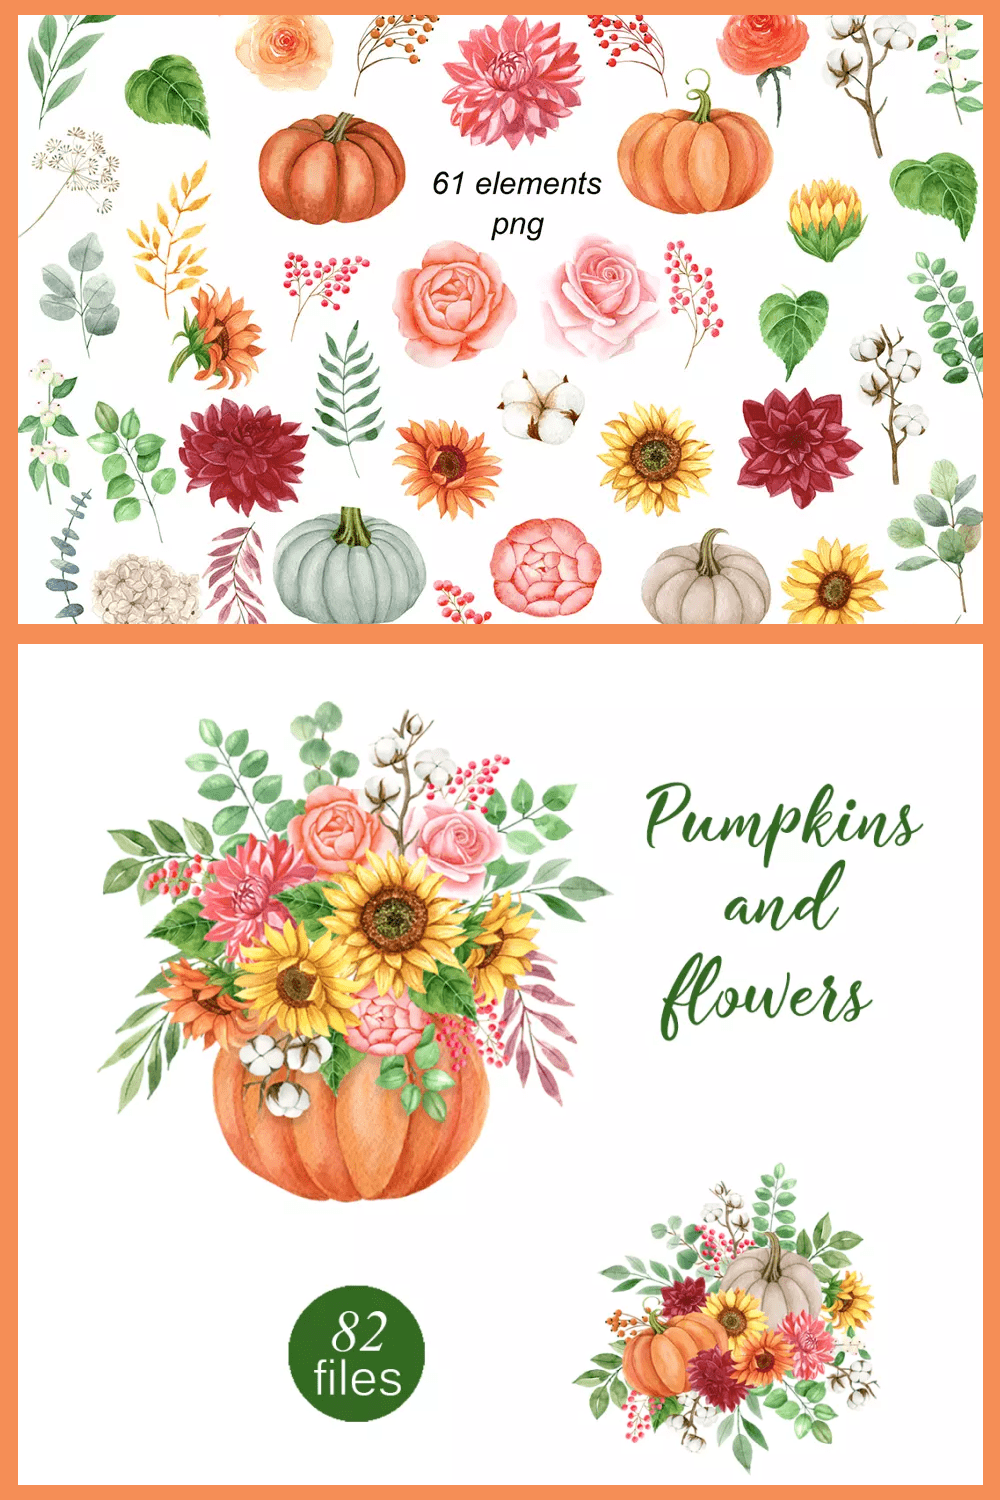 Collage with flowers and twigs in a pumpkin and a bouquet.